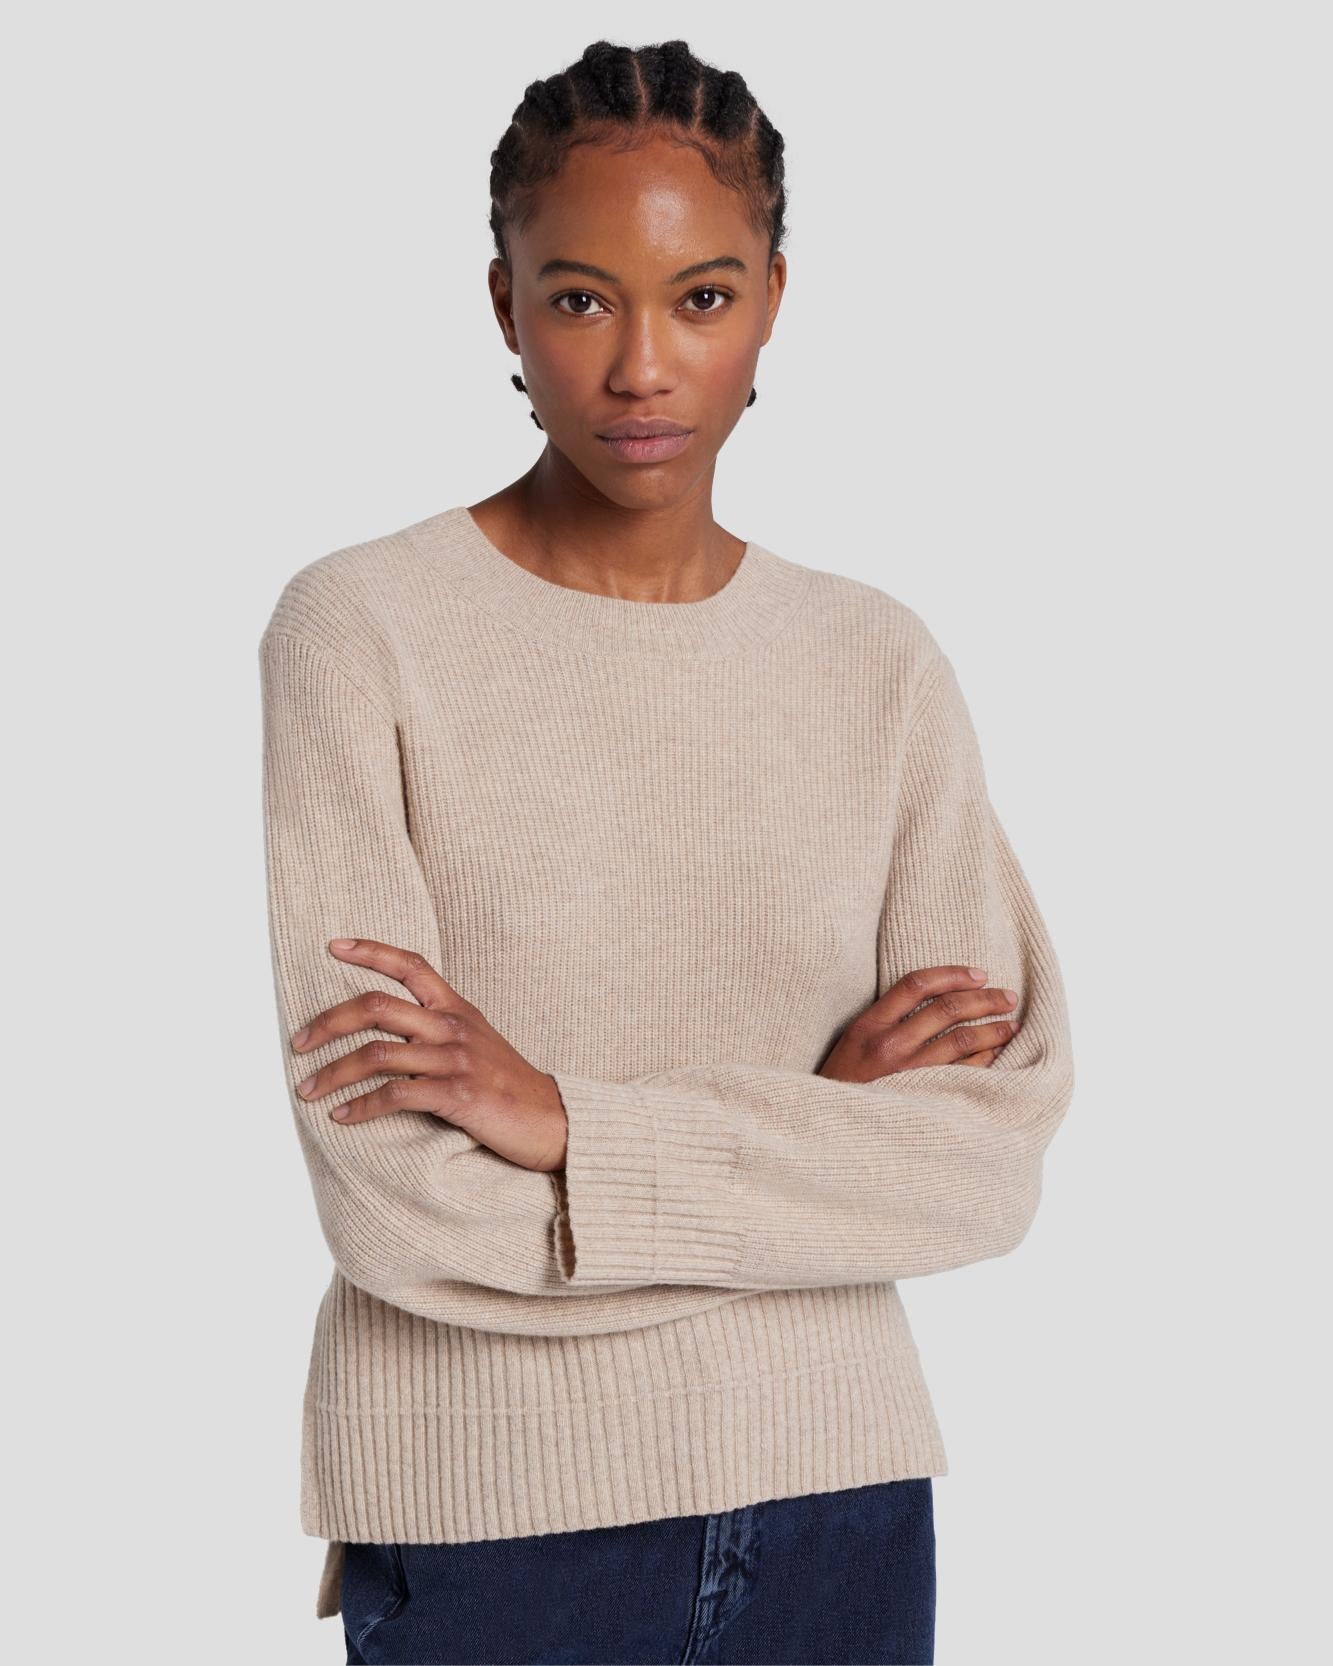 7 For All Mankind Cashmere Crewneck Sweater in Oatmeal 7N122F34OAT